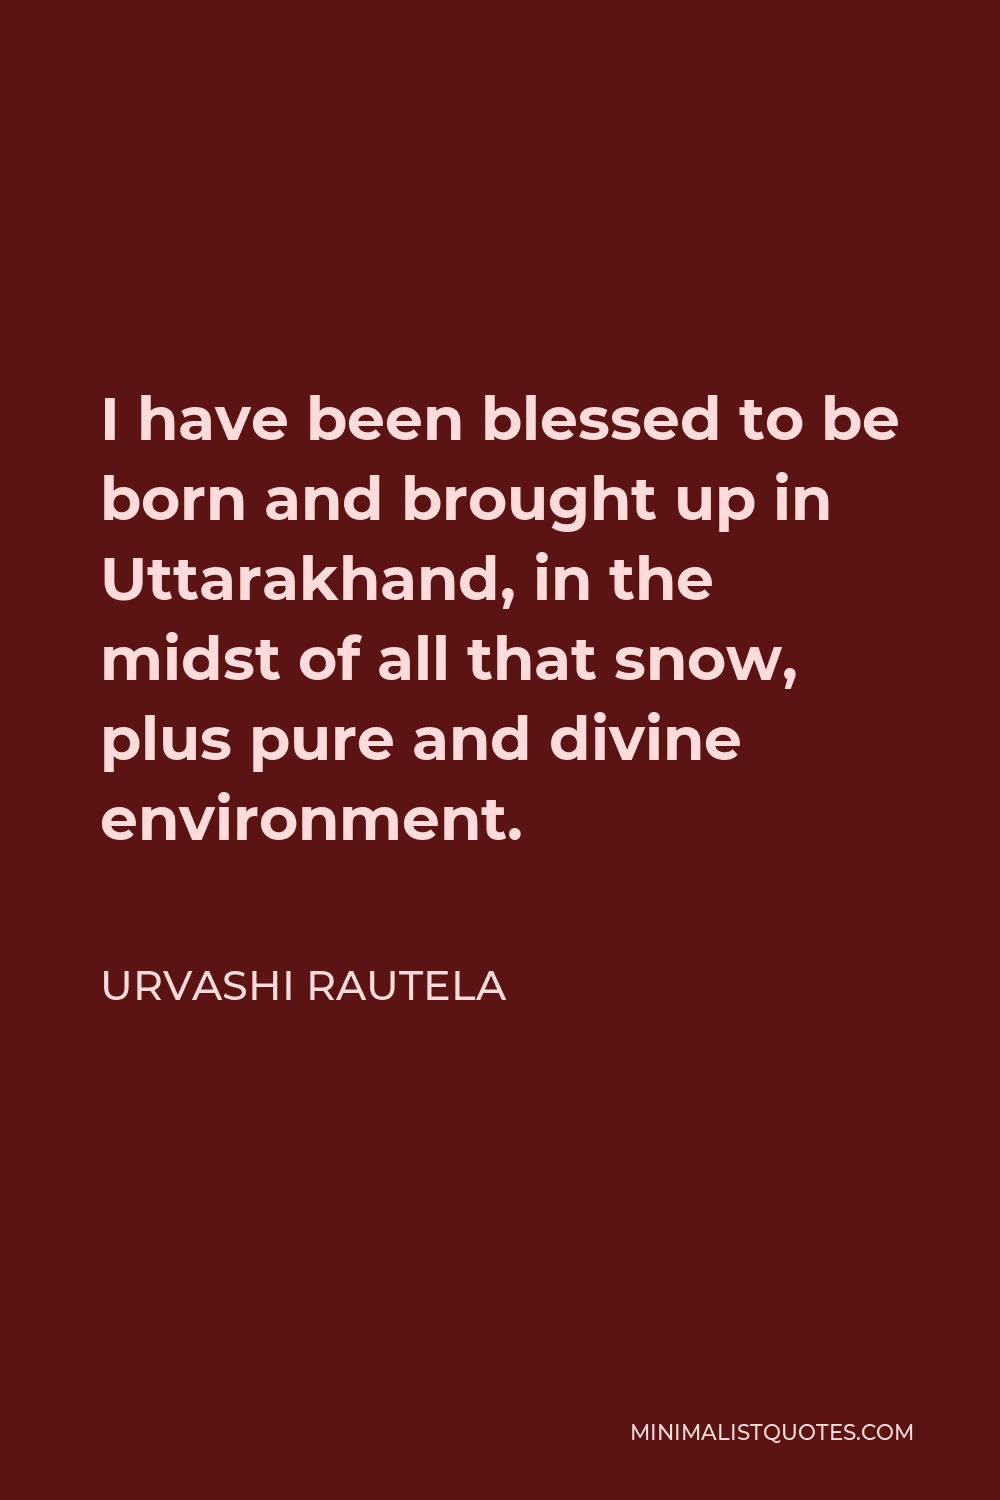 Urvashi Rautela Quote - I have been blessed to be born and brought up in Uttarakhand, in the midst of all that snow, plus pure and divine environment.